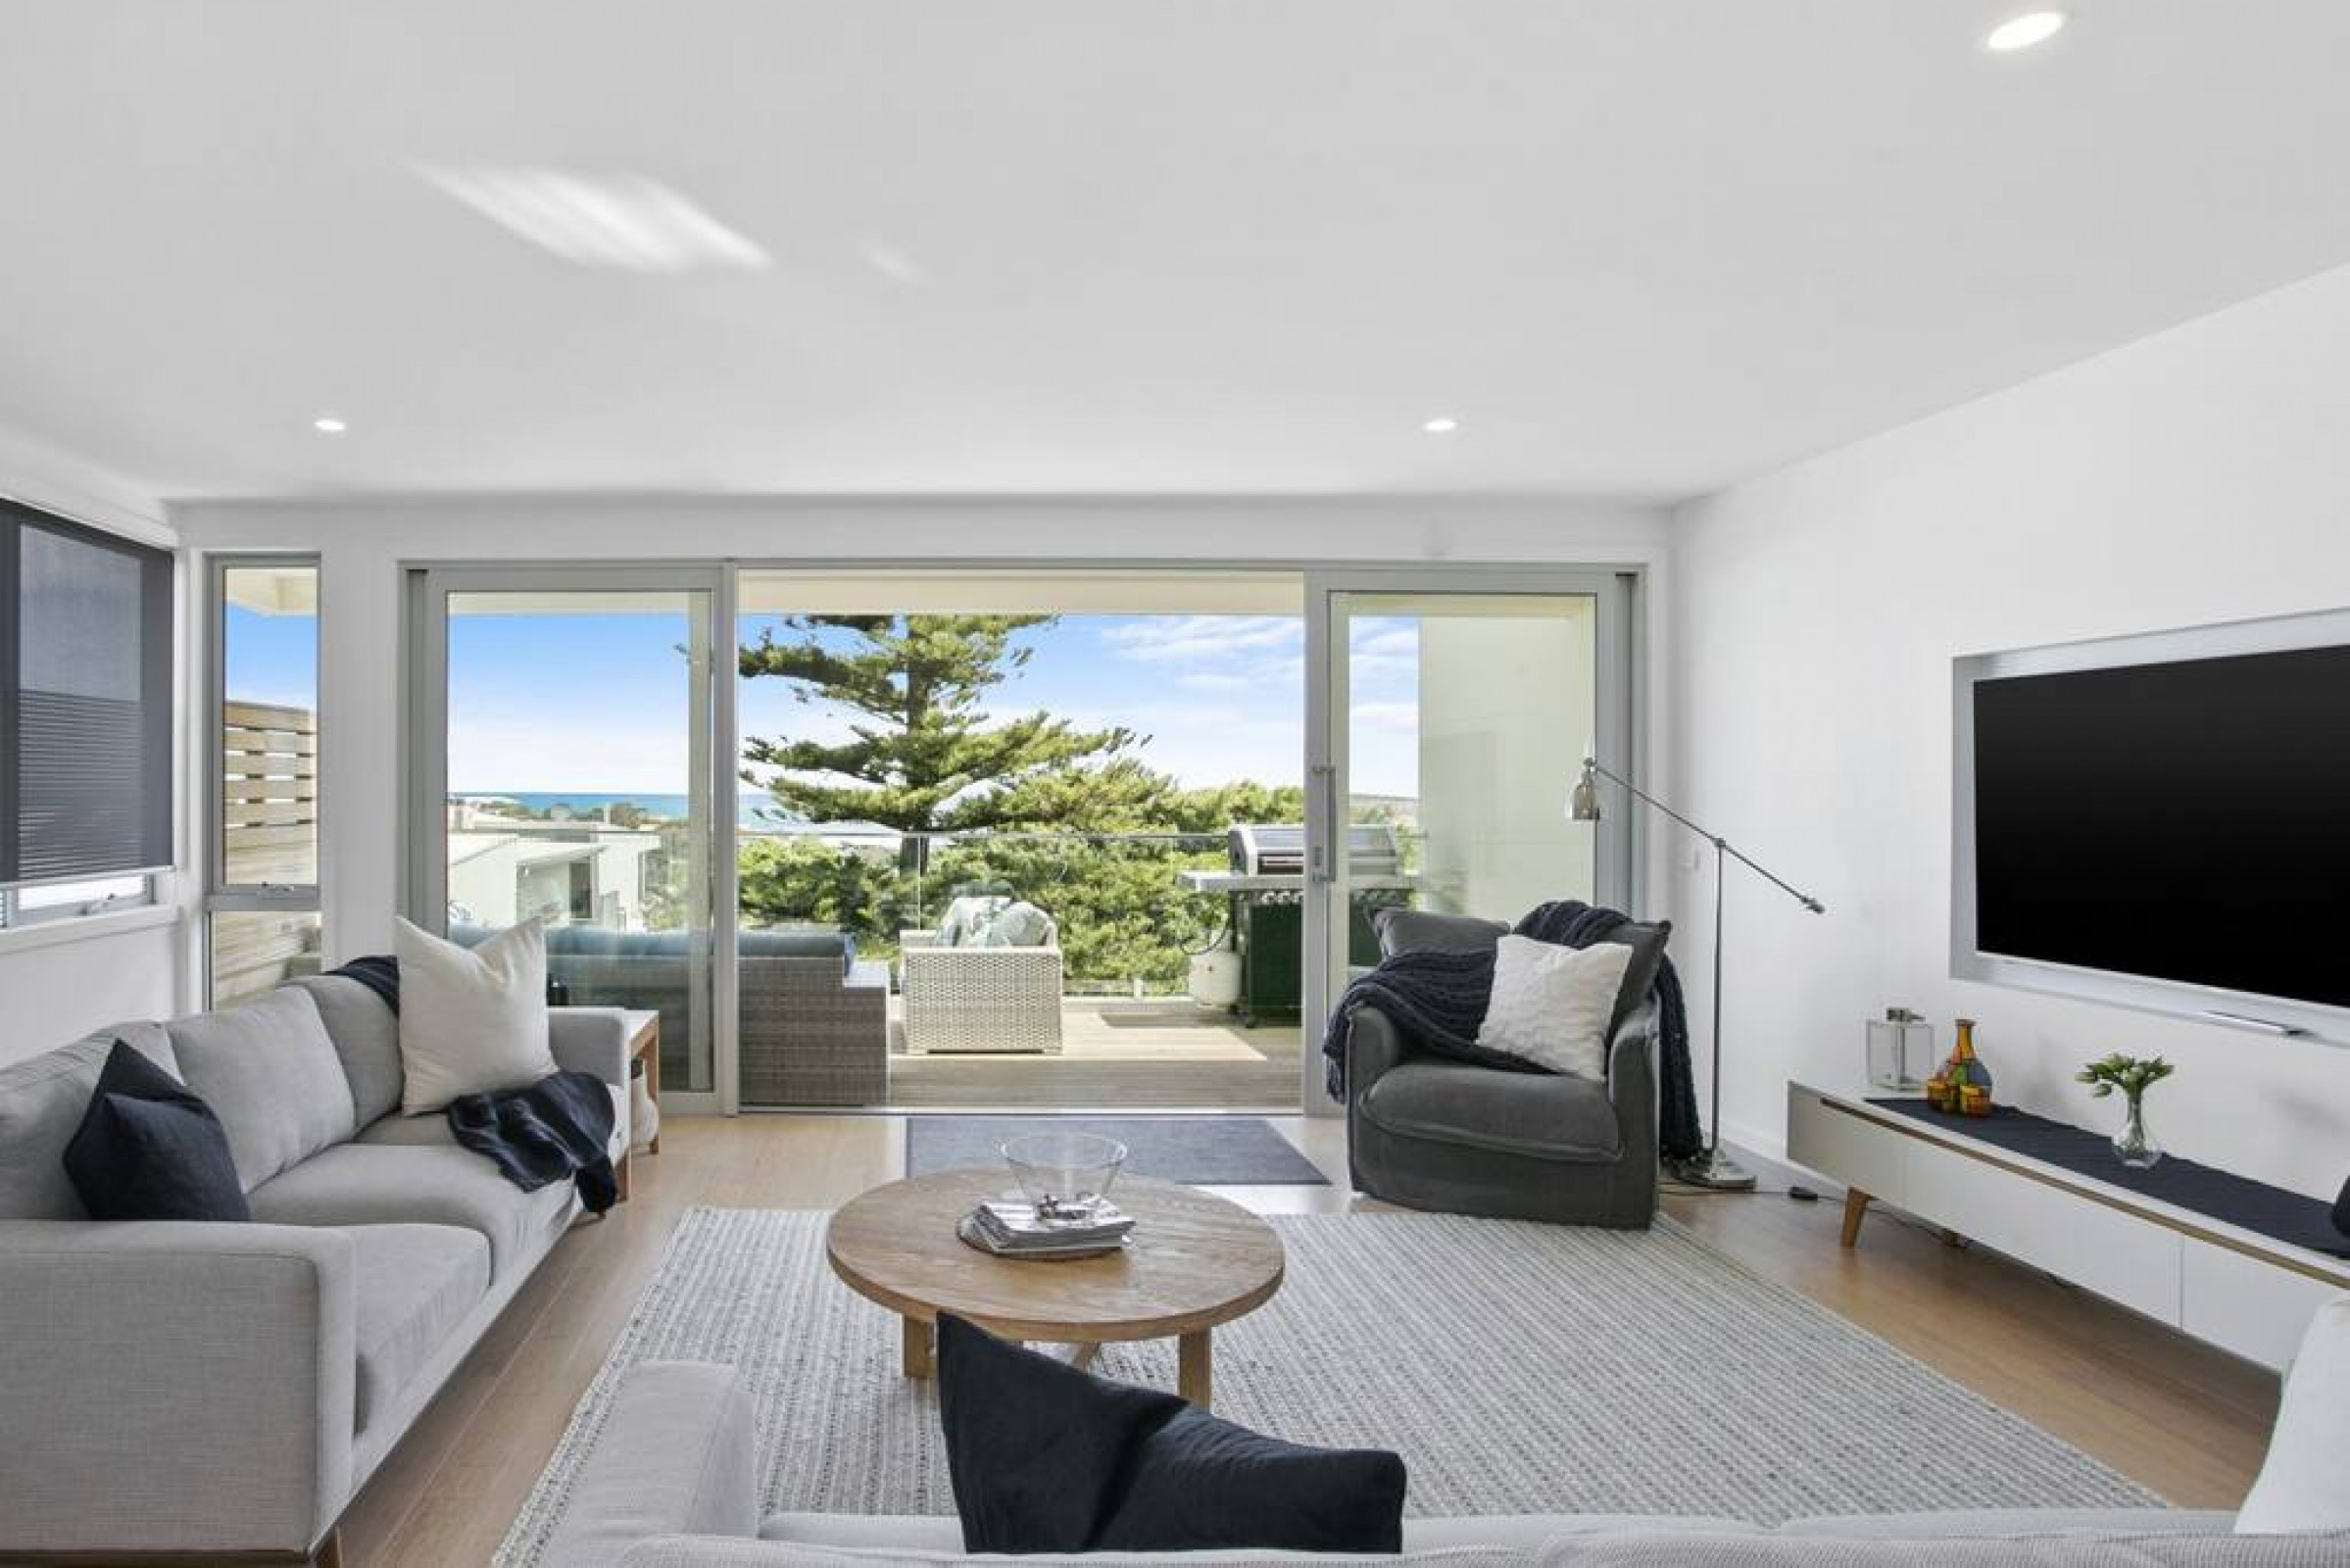 Property Image 1 - Beachside Living with Sea Views at the Pines